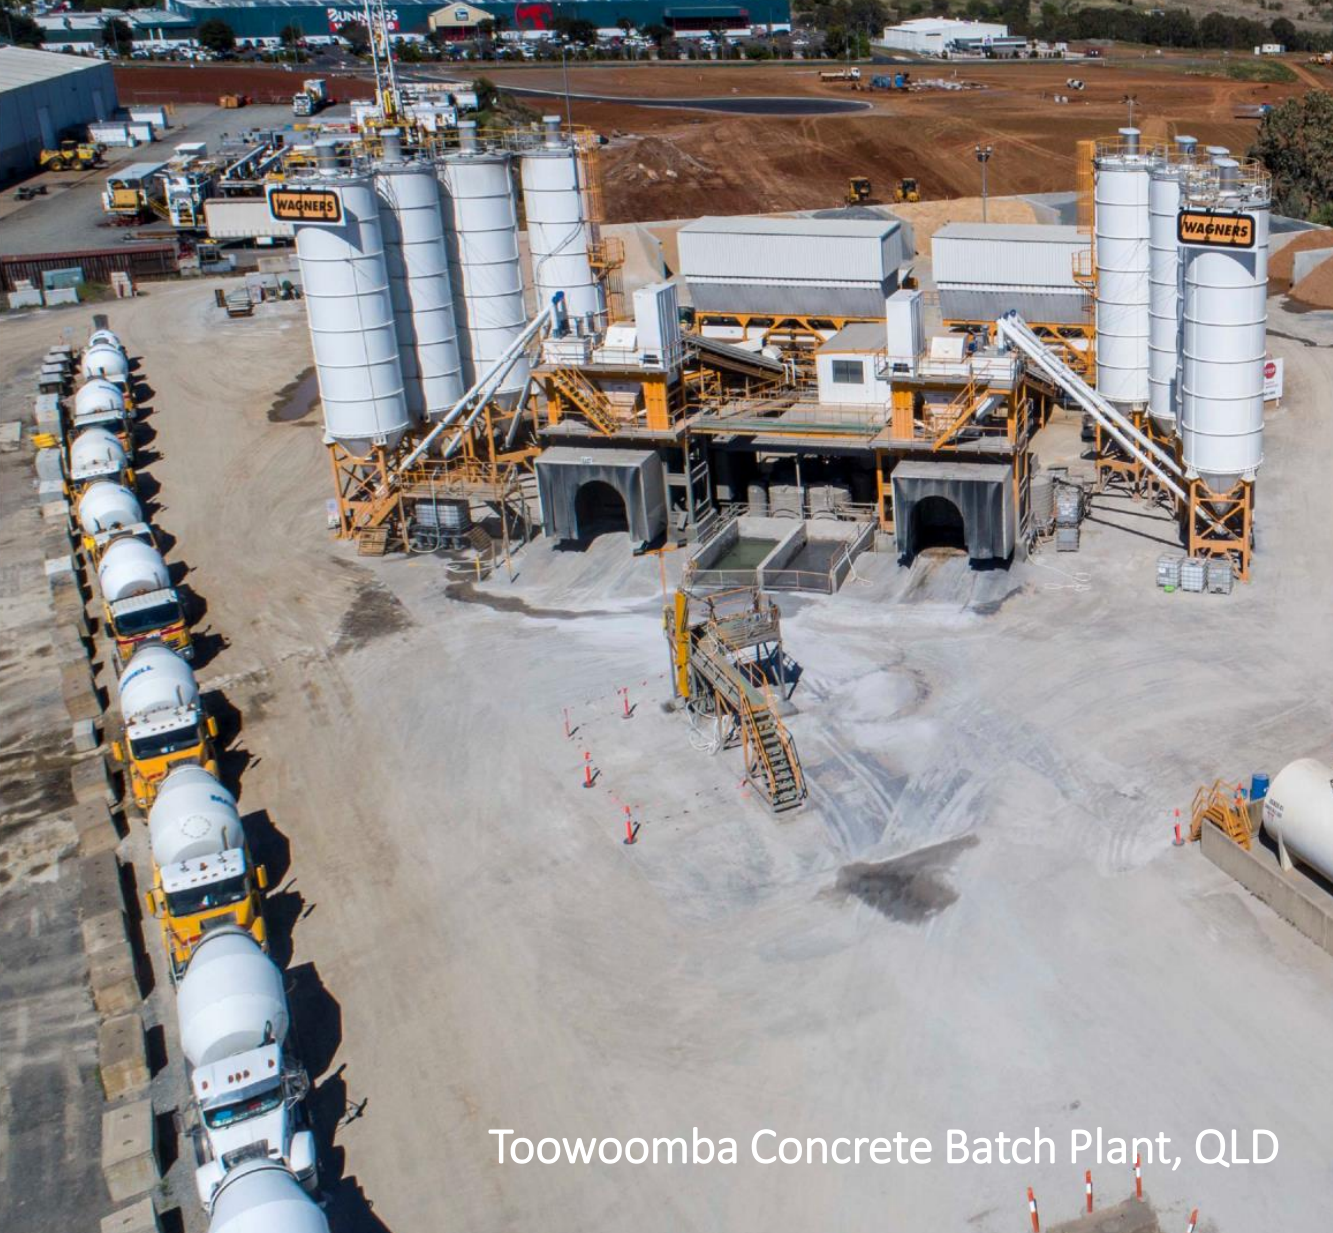 (Source: Wagners) An aerial shot of Wagners' concrete batch plant in QLD 